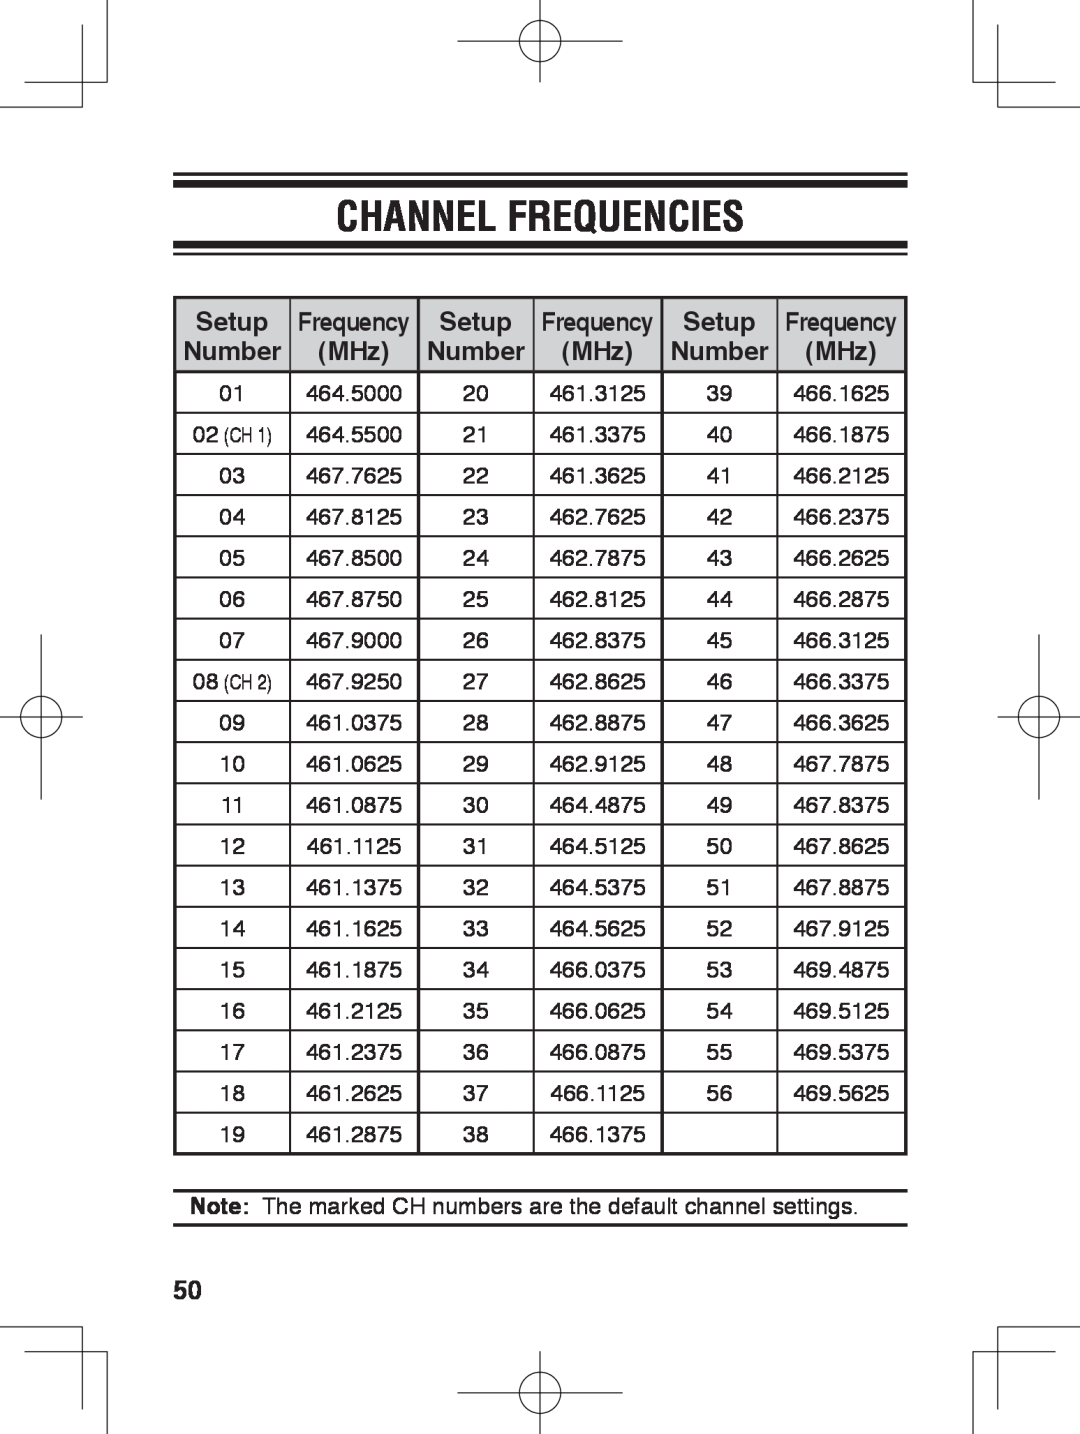 Kenwood TK-3230 instruction manual Channel Frequencies 